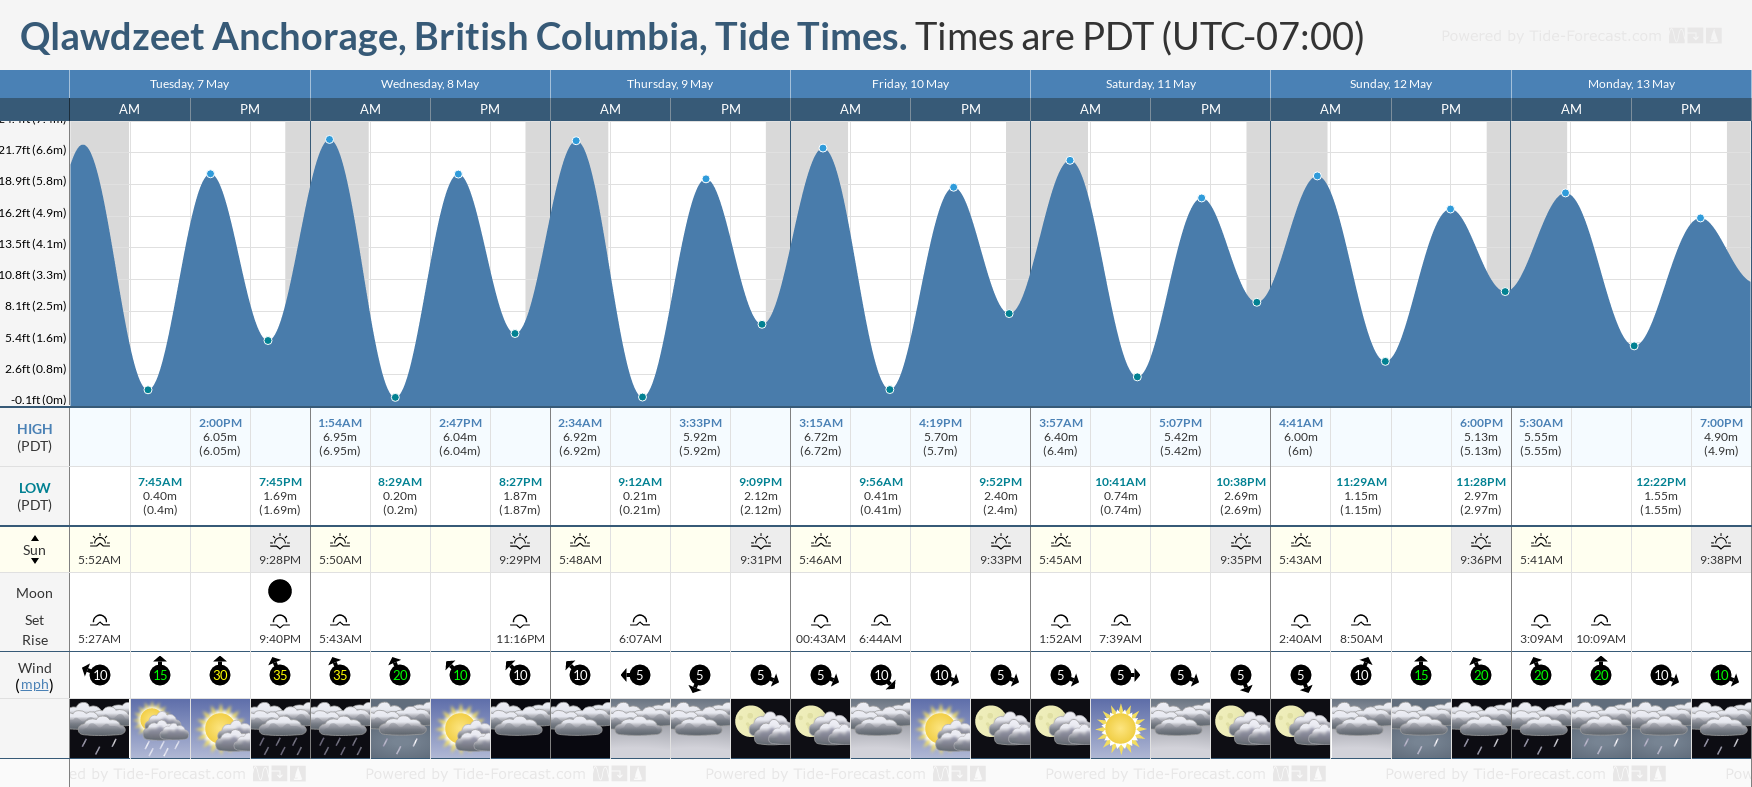 Qlawdzeet Anchorage, British Columbia Tide Chart including high and low tide tide times for the next 7 days